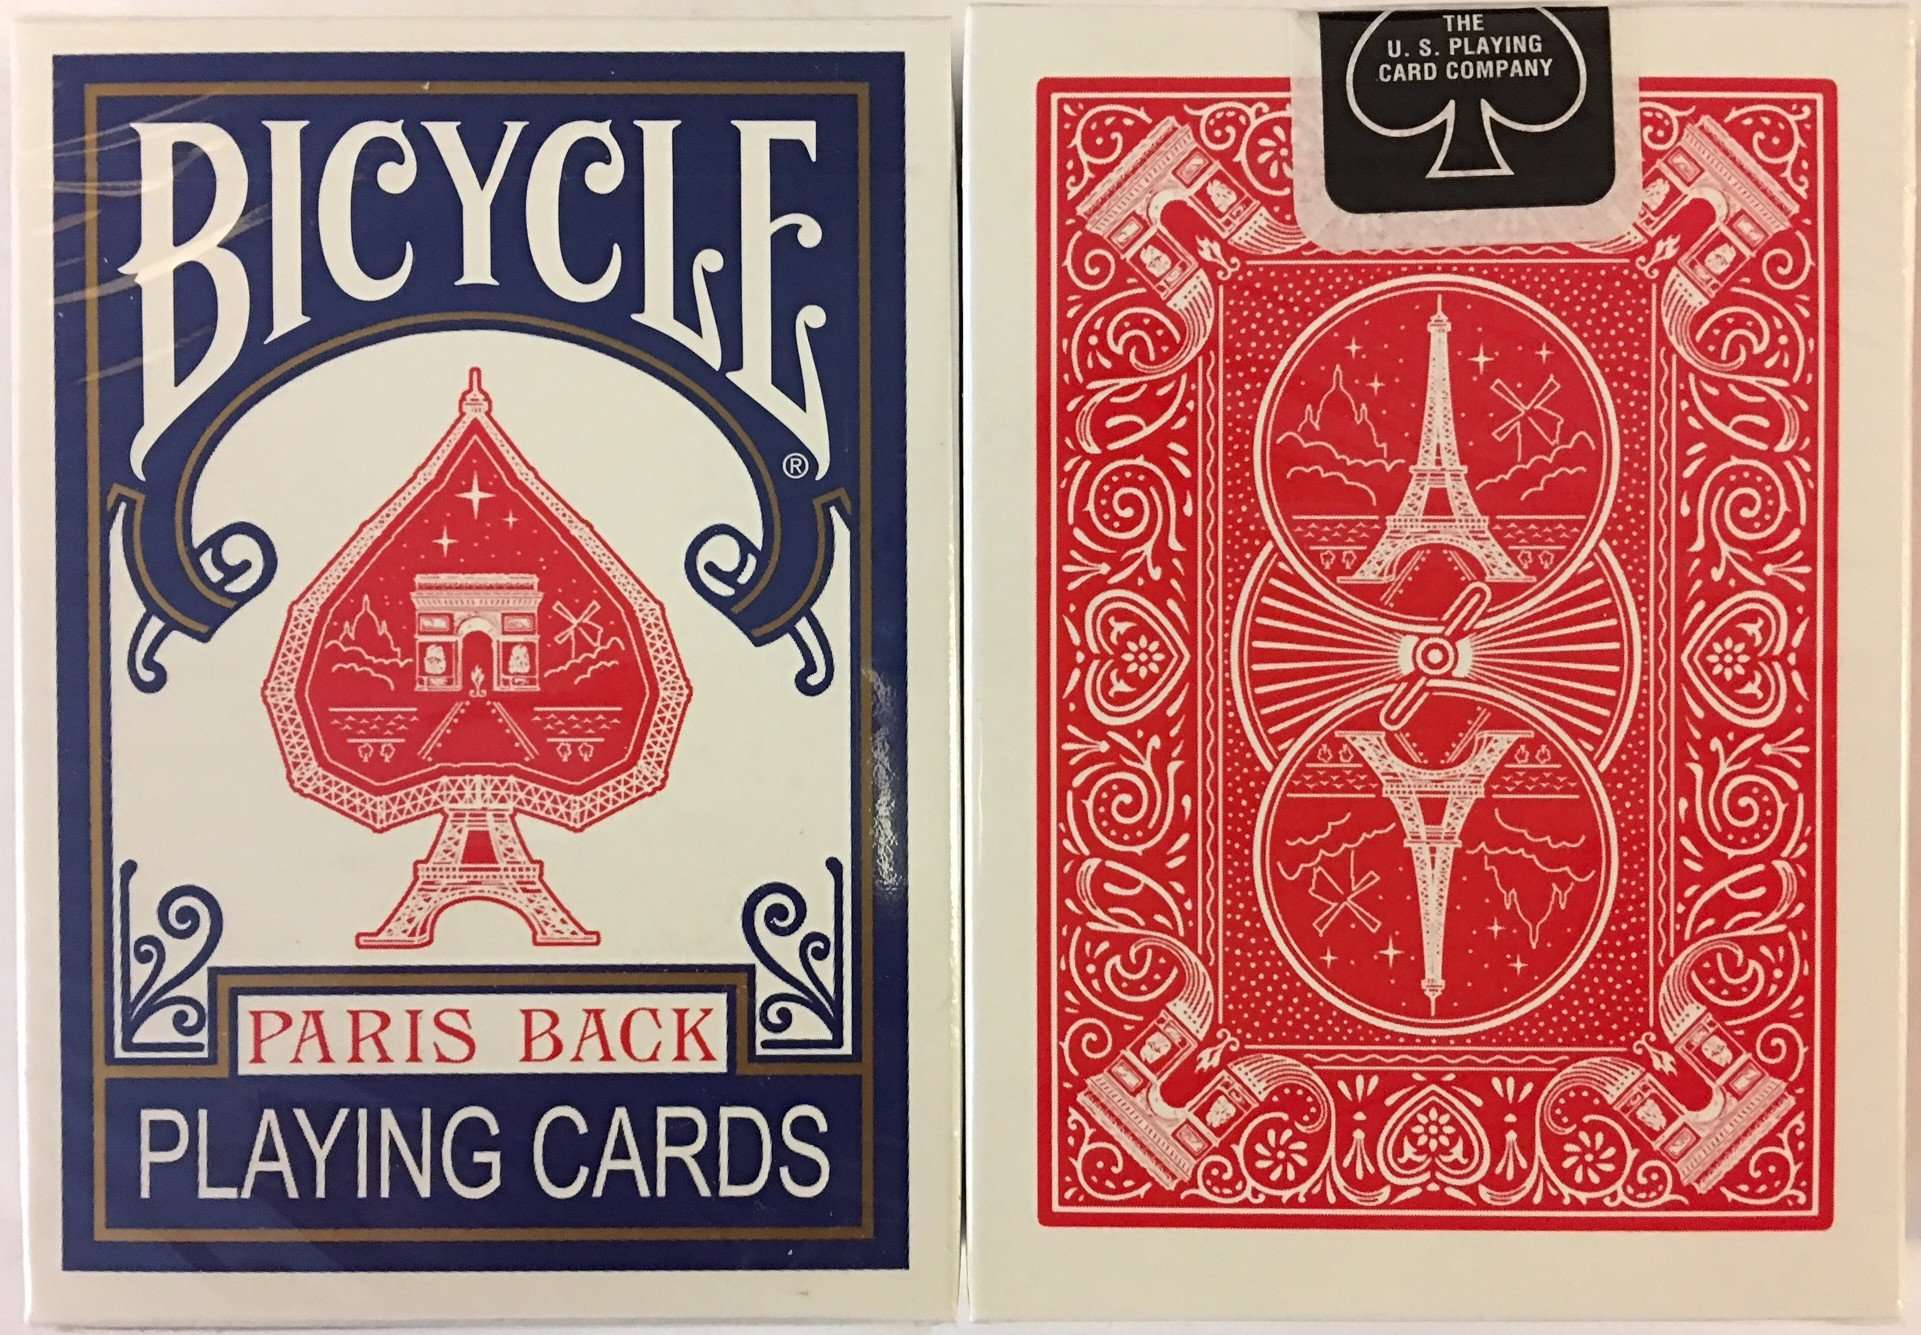 Paris Back Bicycle Playing Cards Poker Size Deck USPCC Custom Limited – 